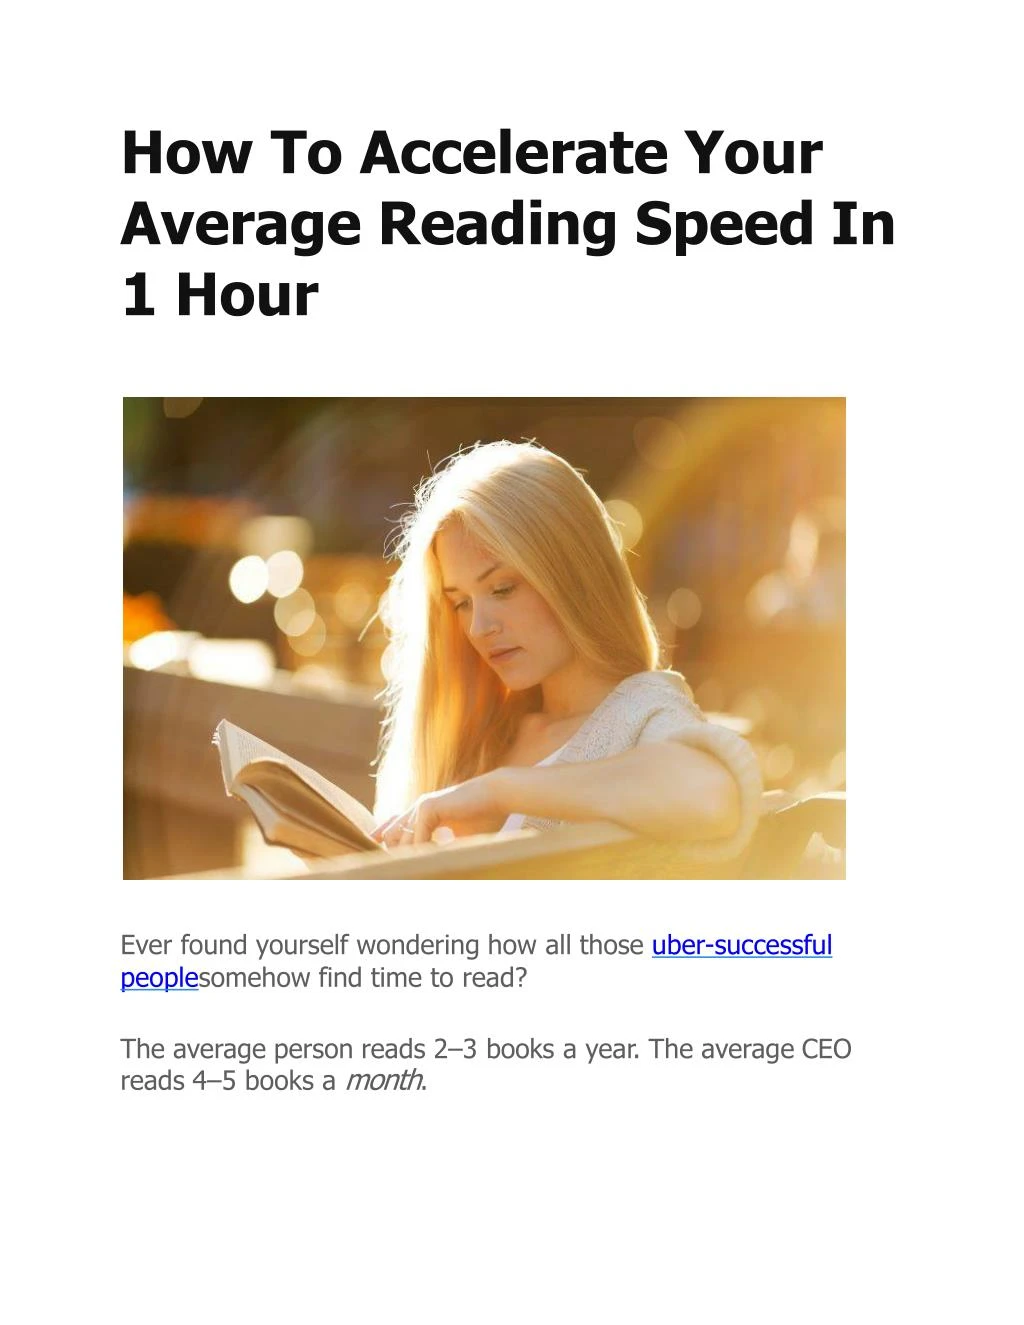 how to accelerate your average reading speed in 1 hour